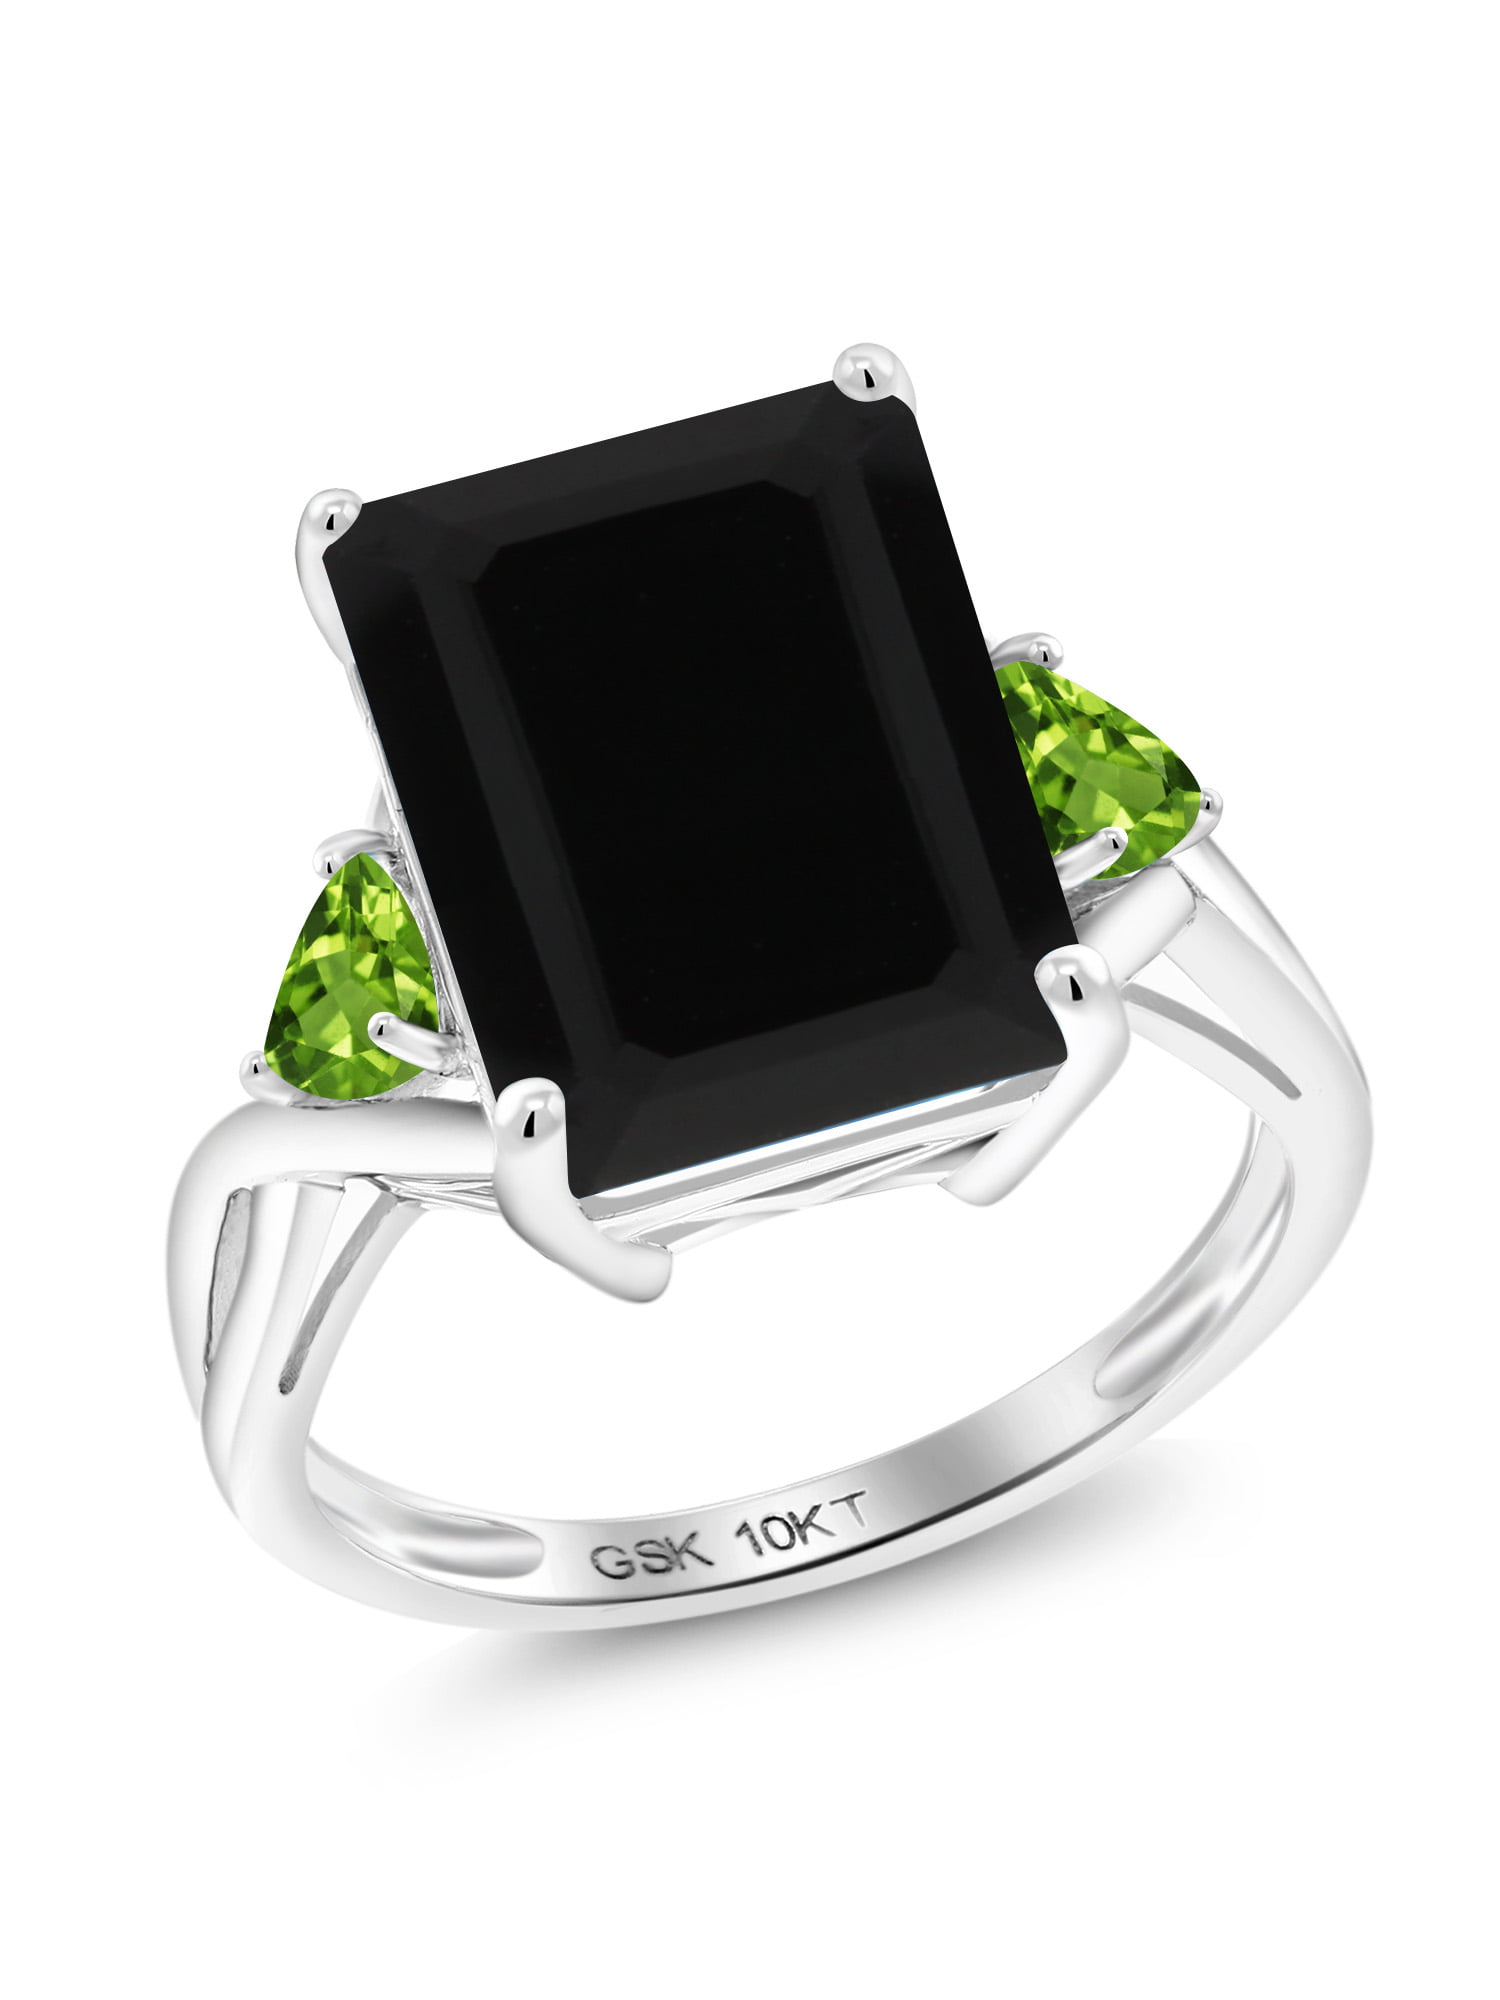 Details about   7.40 Ct Black Onyx Ring Size Emerald Shape Loose Gemstone 